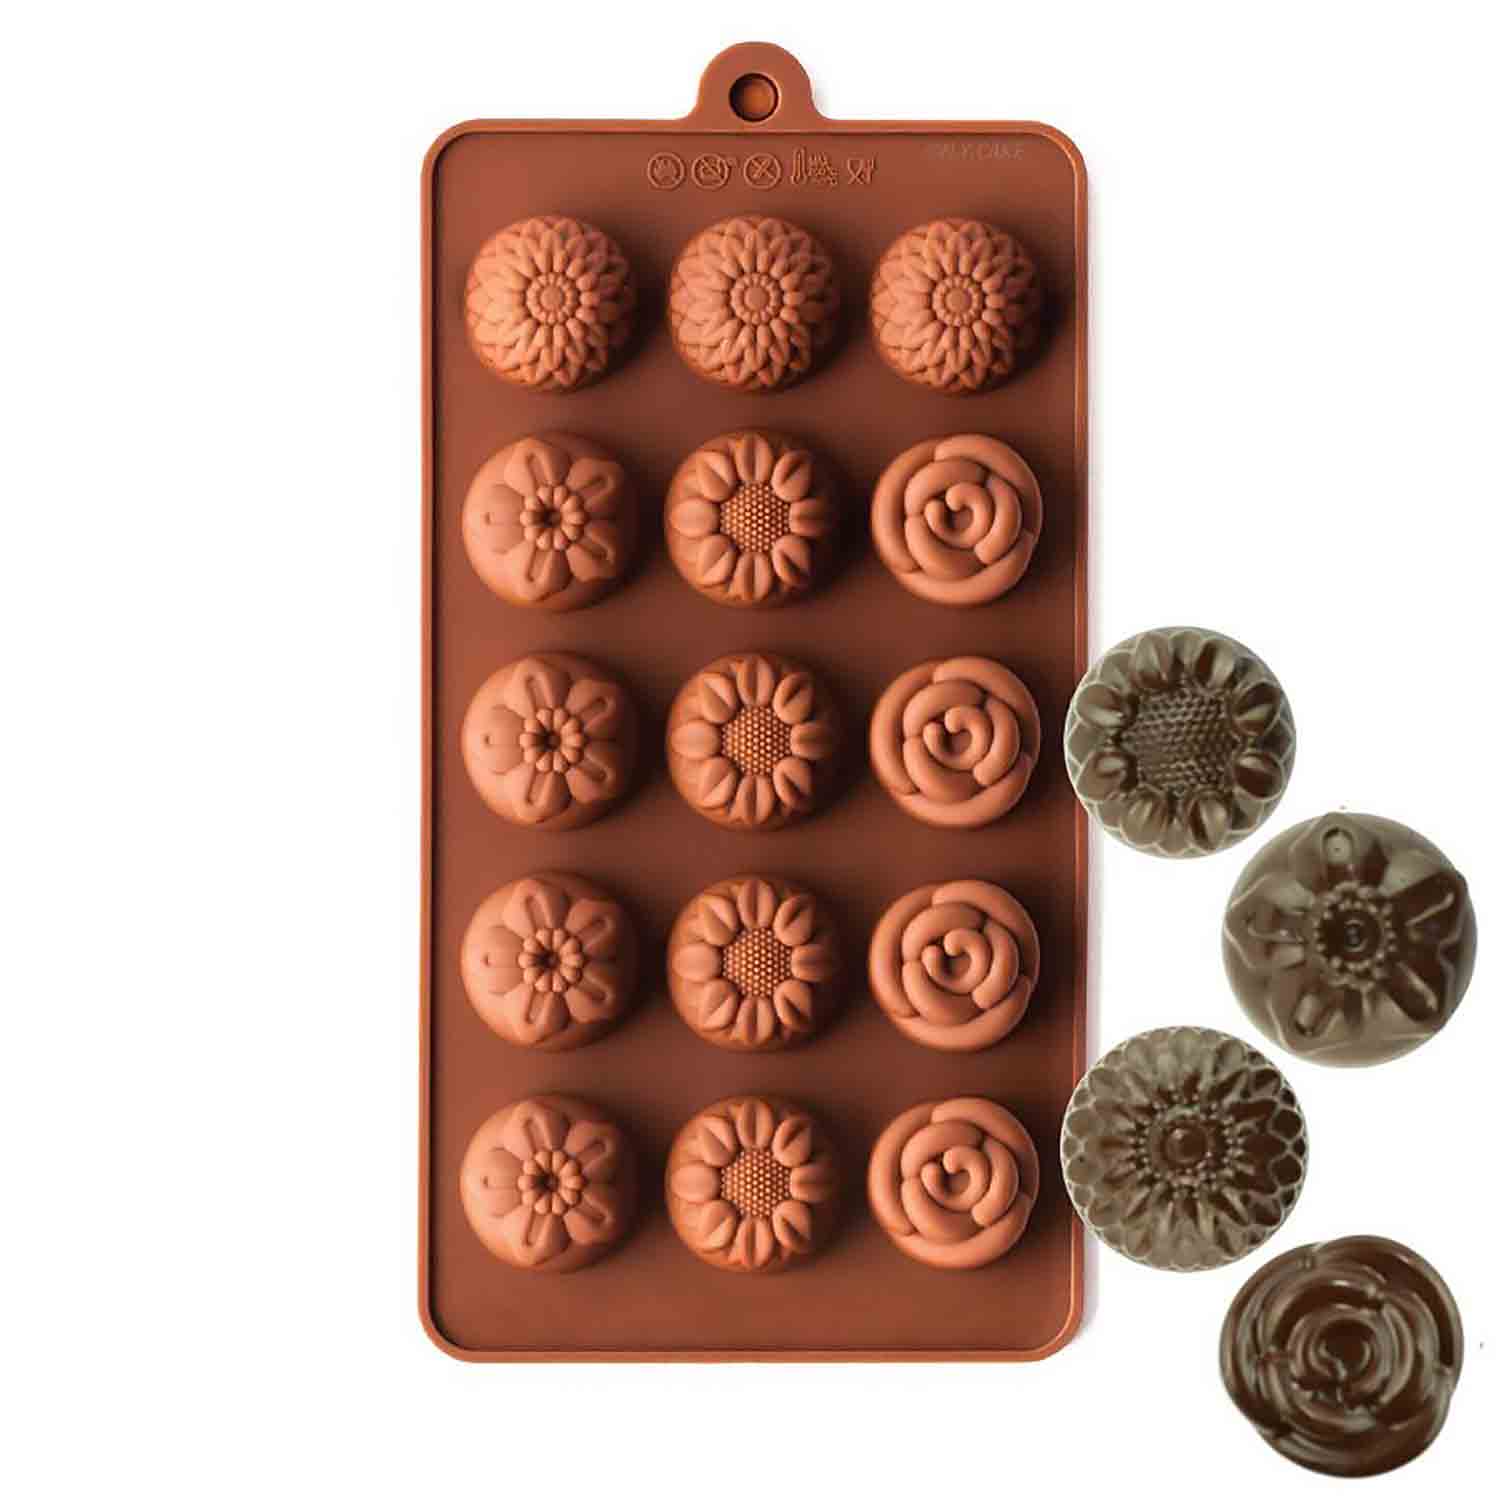 NY Cake Flower Assortment Silicone Chocolate Candy Mold 1